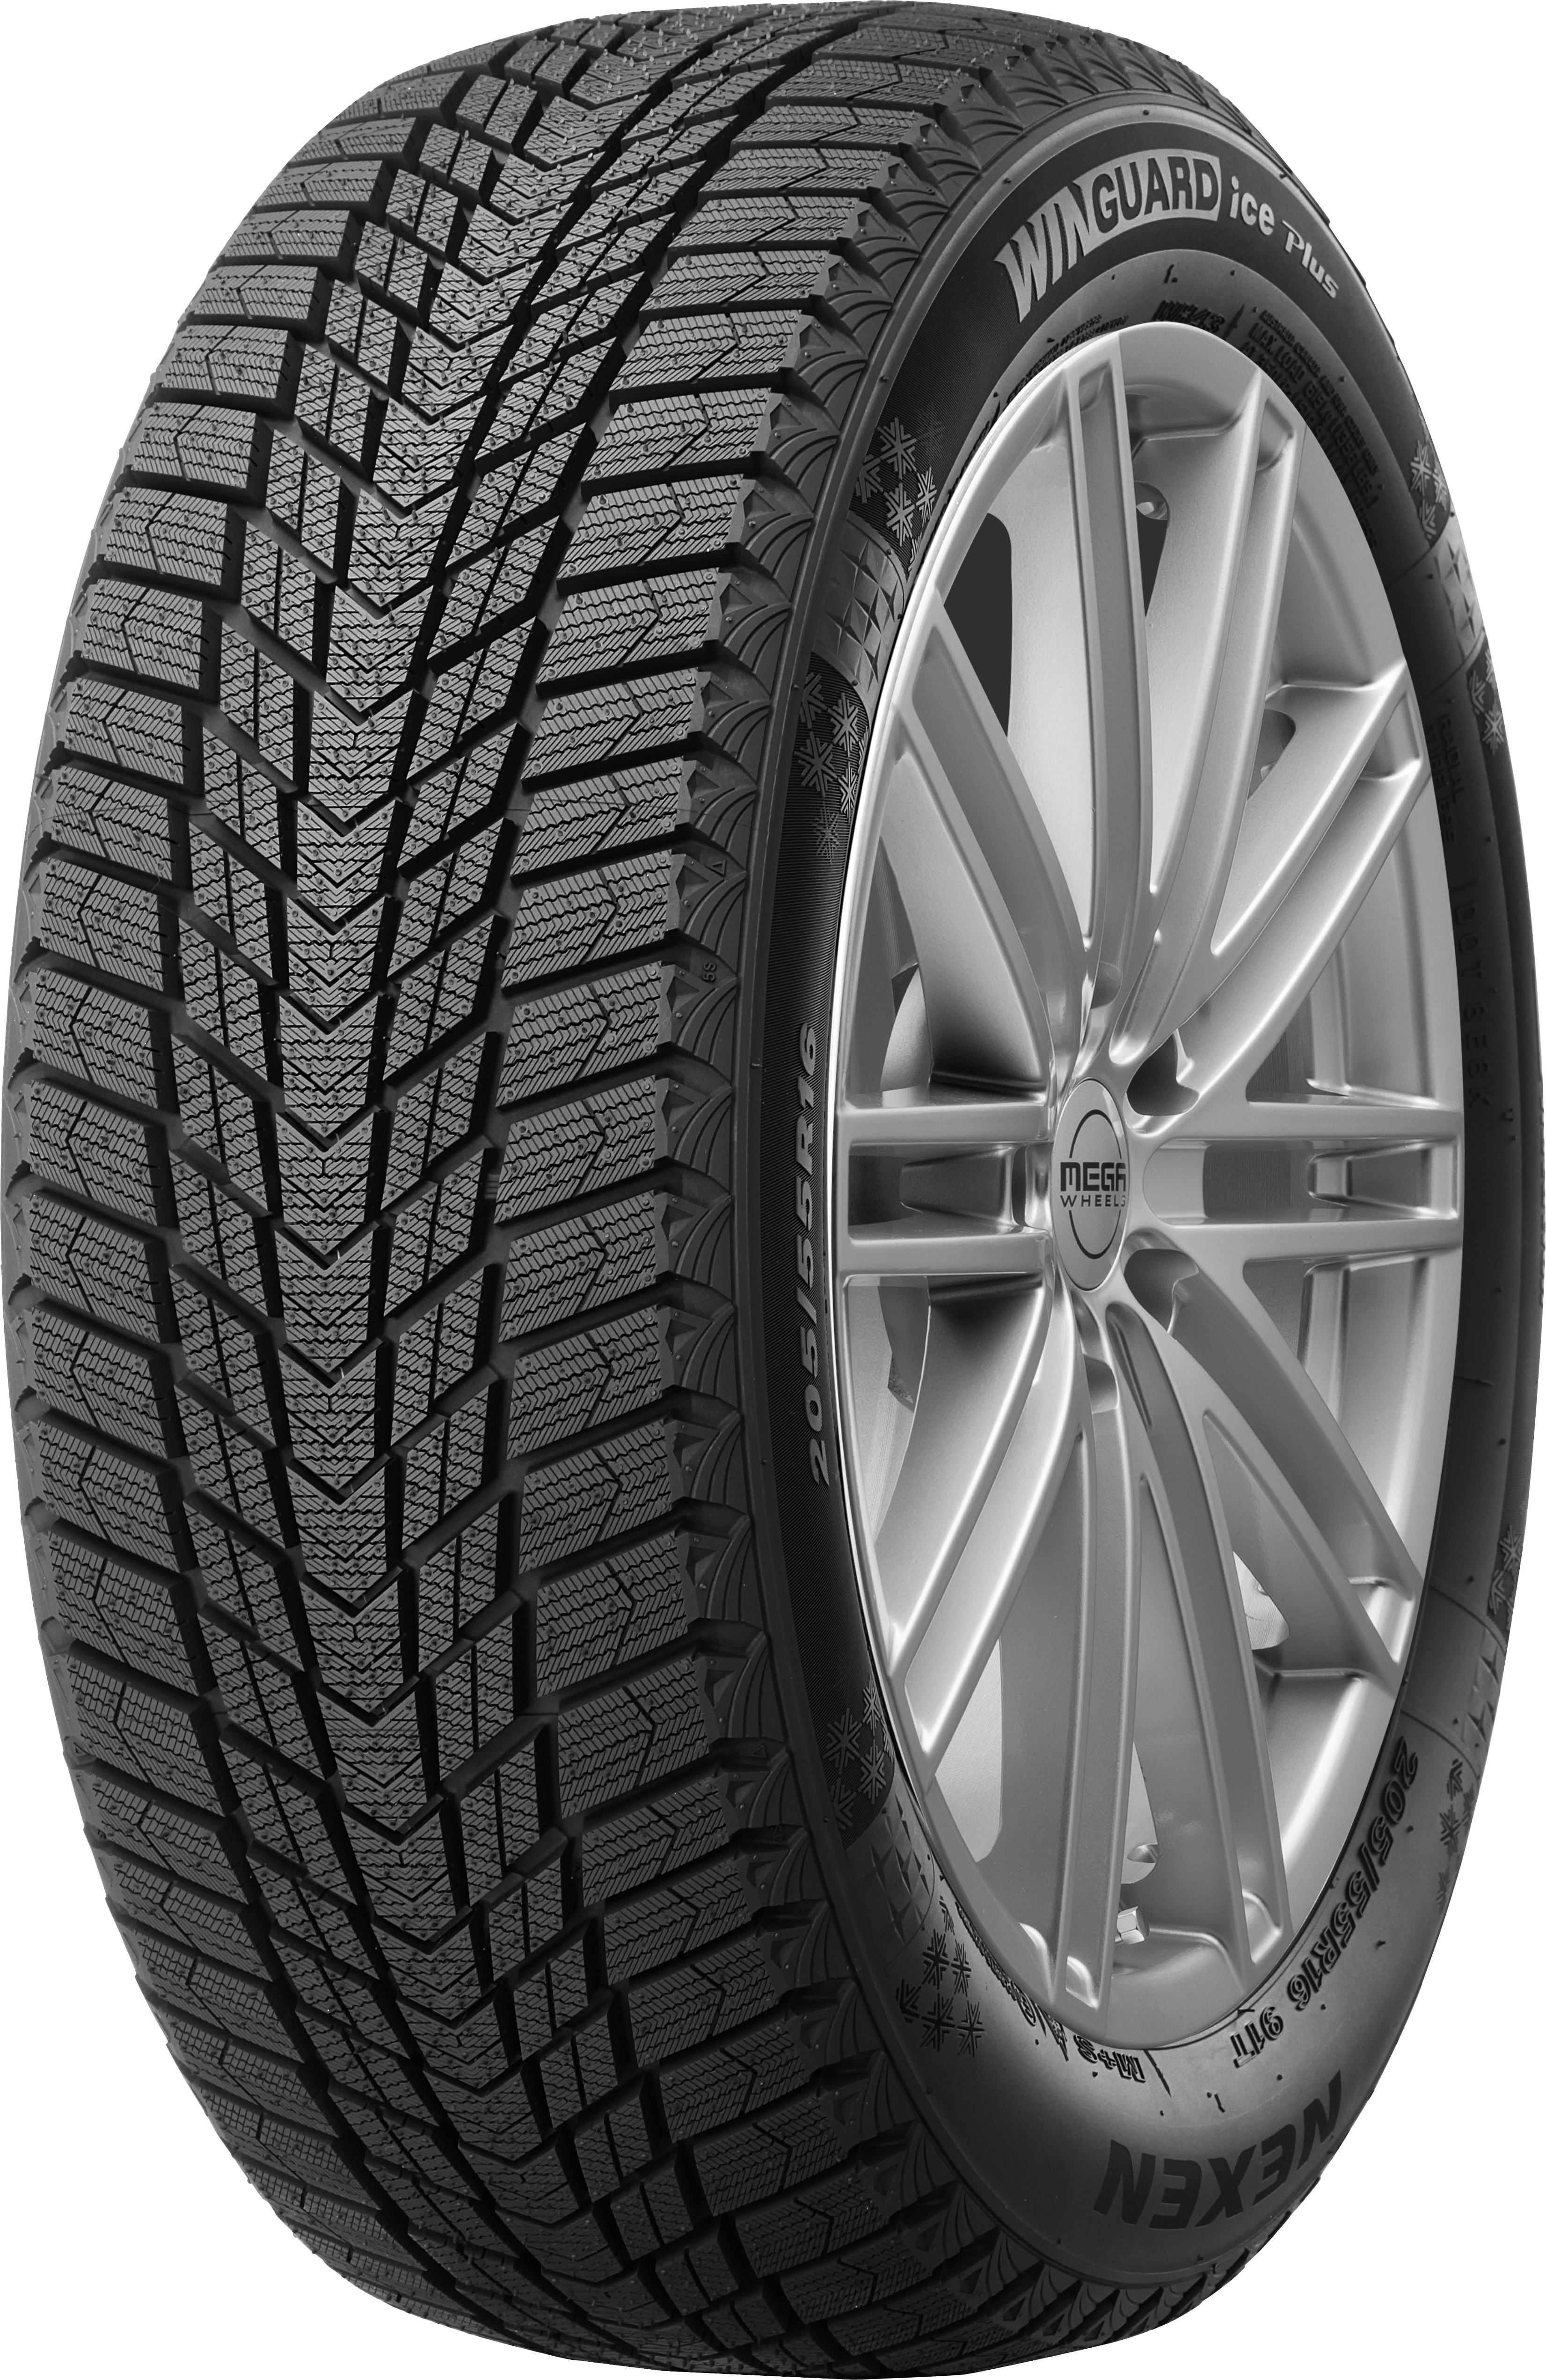 Plus Tests Ice WH43 Reviews and Tire Nexen - Winguard